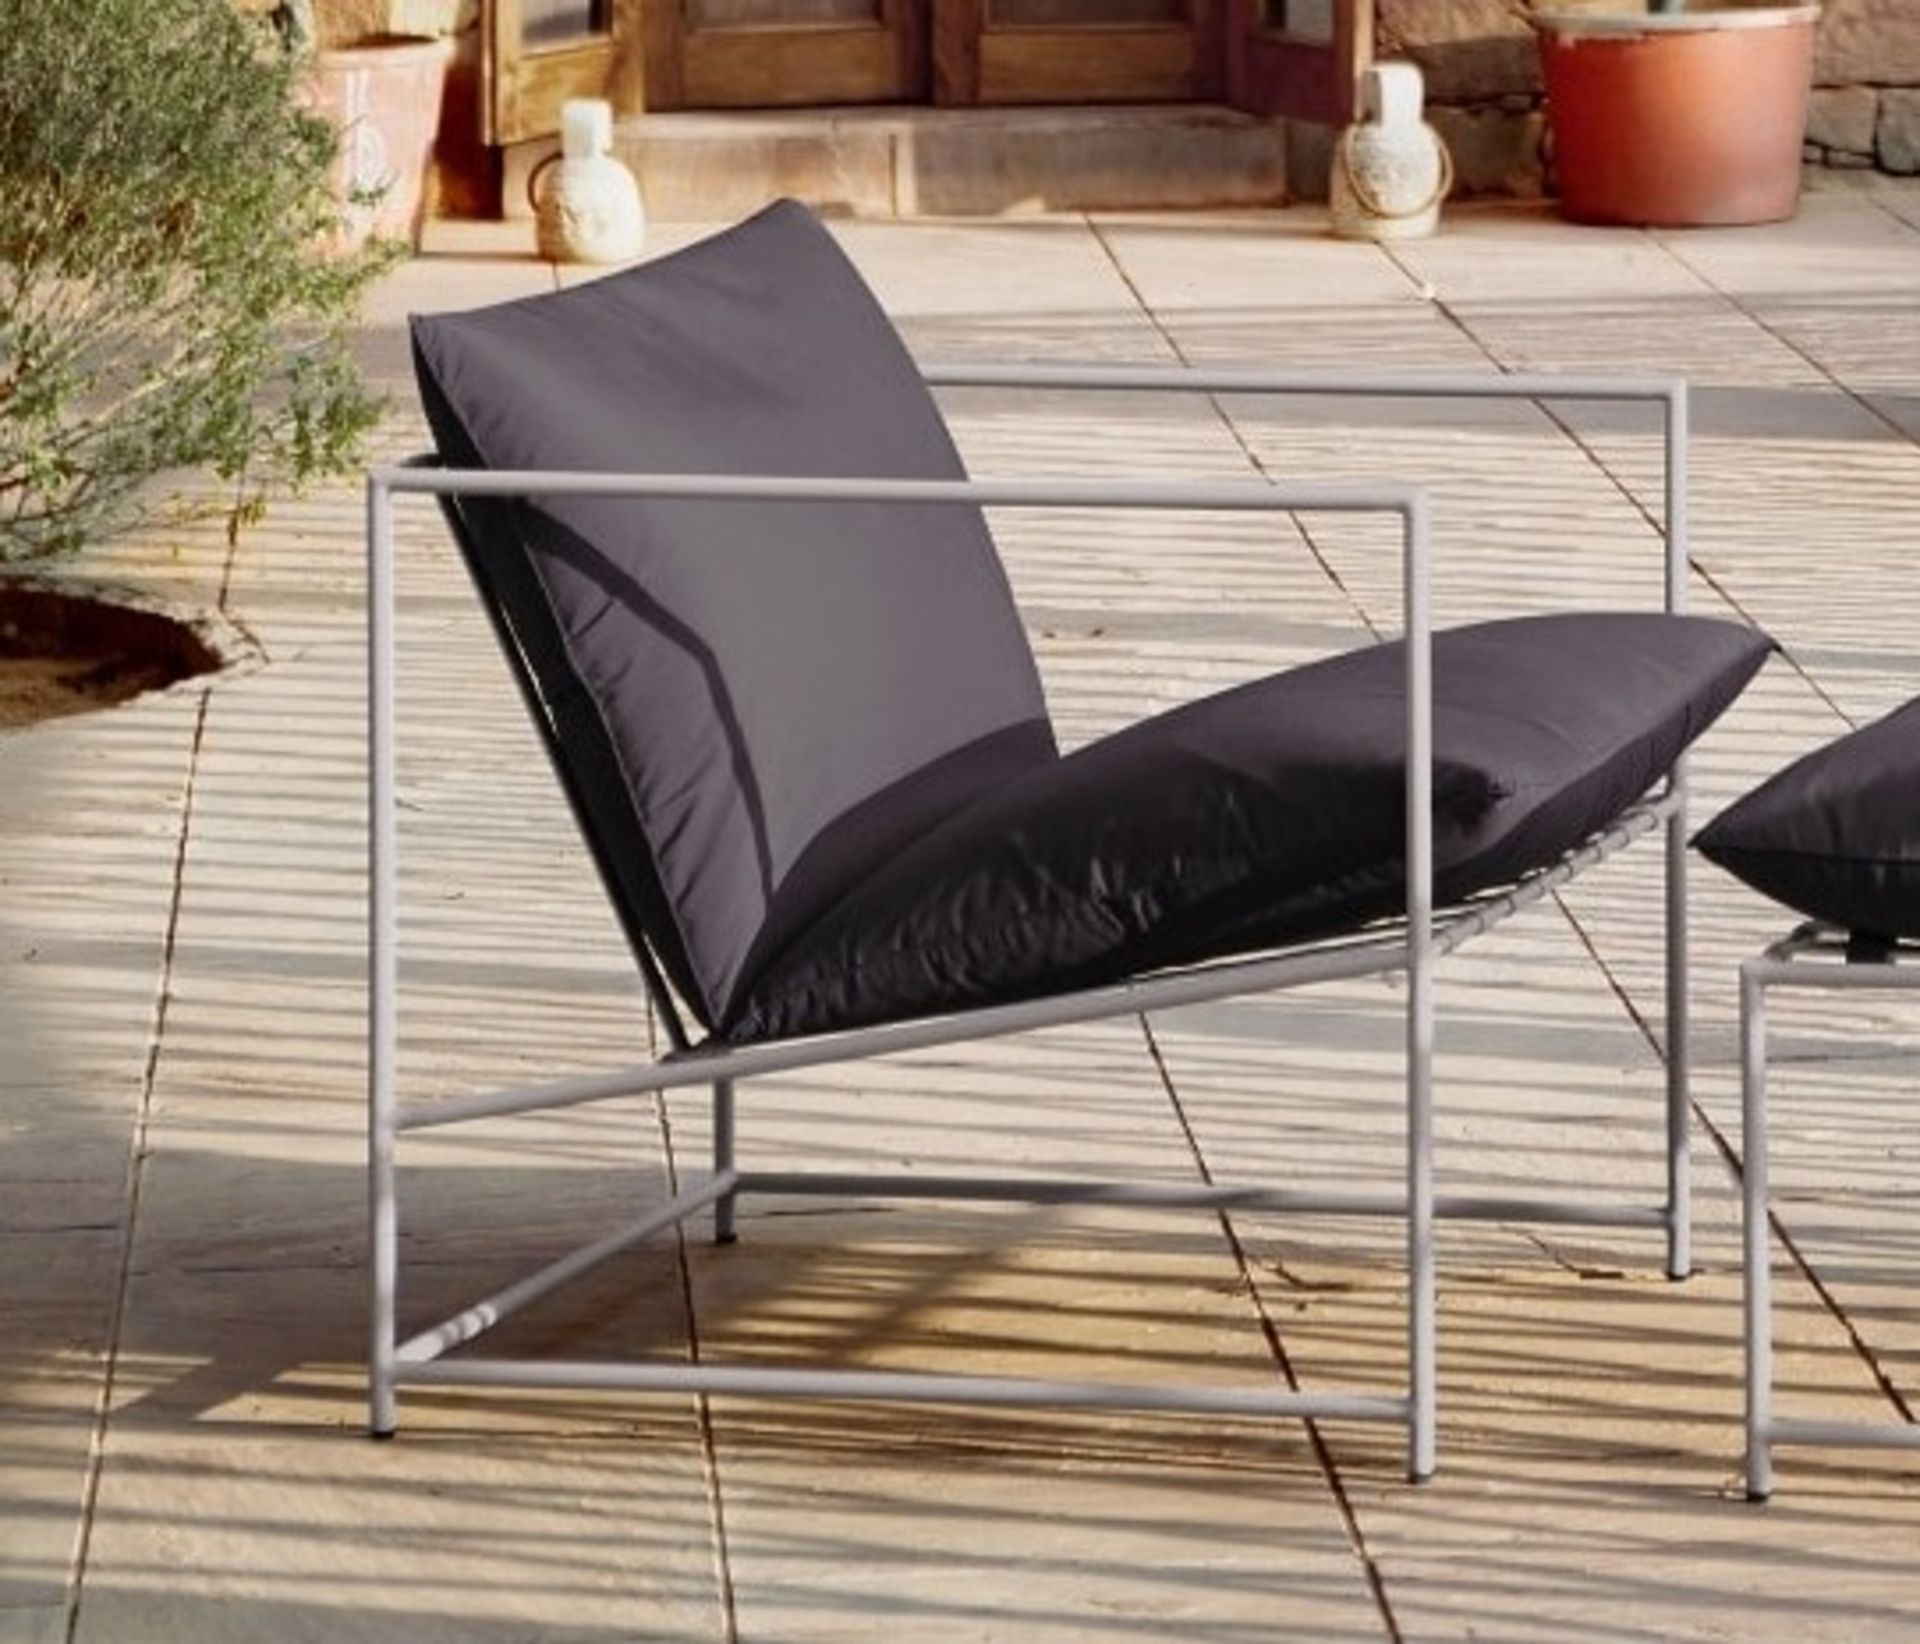 Kennington Garden Chair, Platinum Steel & Cushion by Swoon Editions (brand new boxed) (brand new